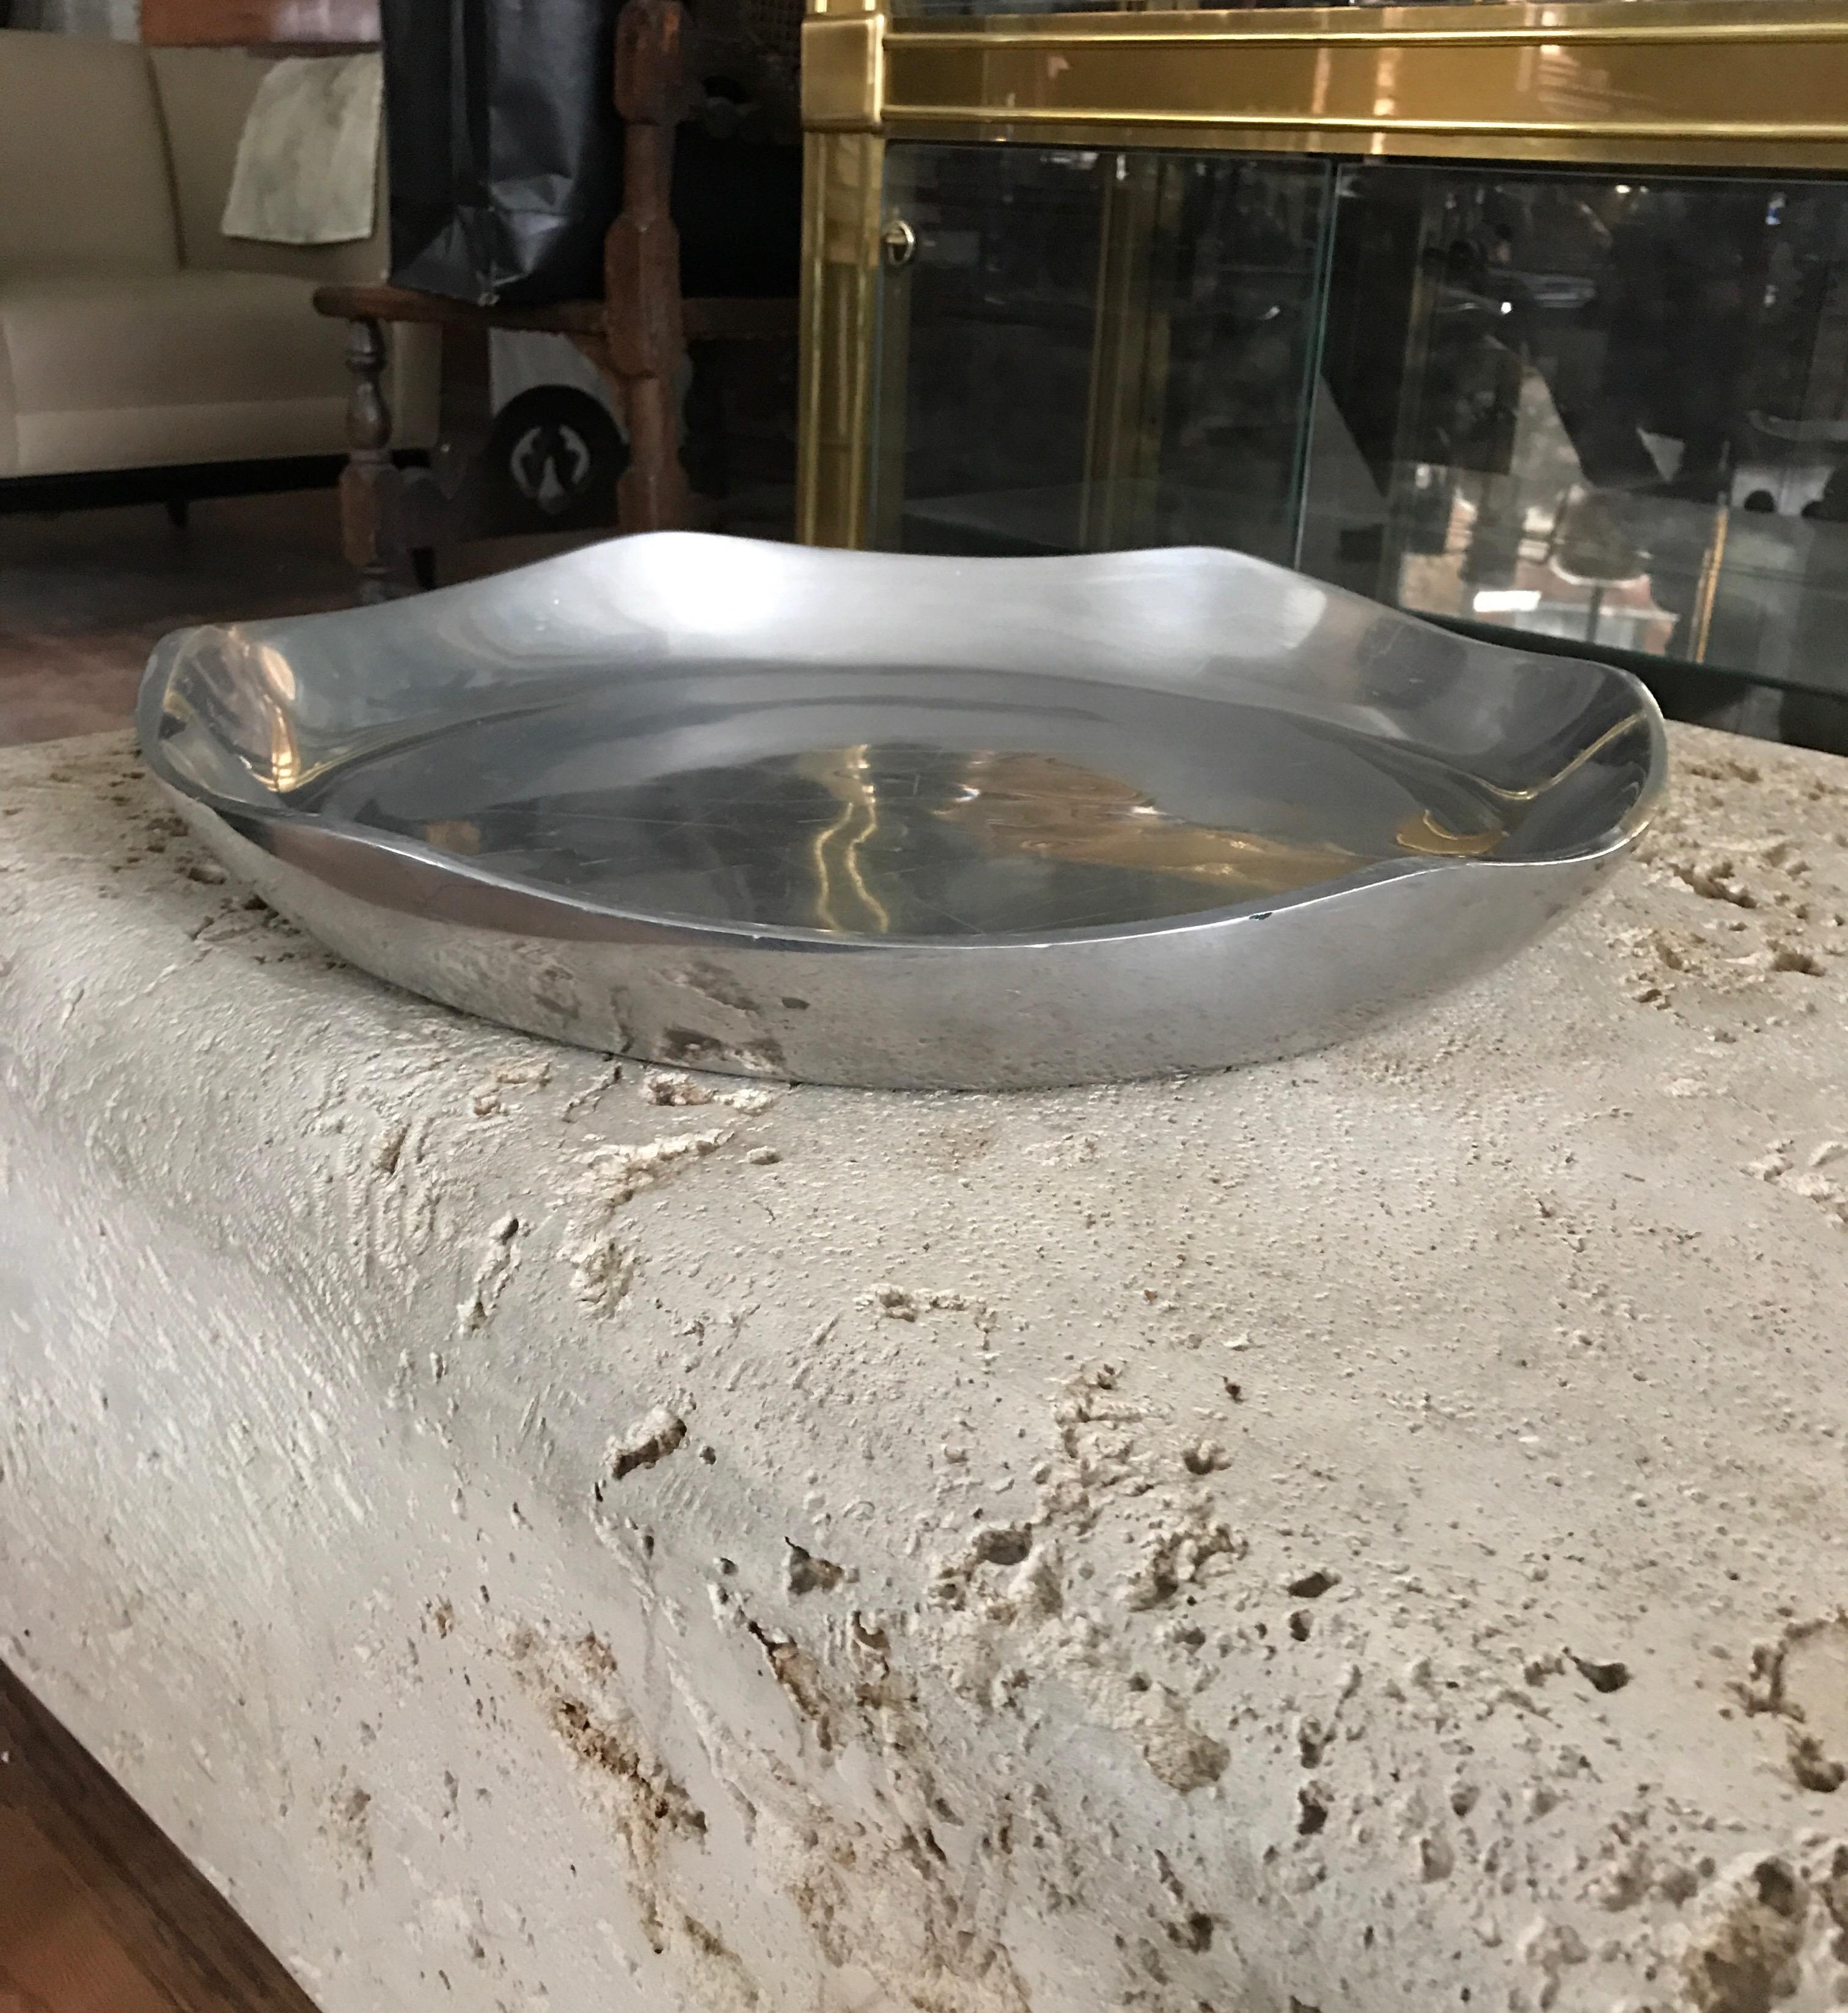 Large aluminum Nambe serving platter or very large dish.
Great on a kitchen counter as a centrepiece.